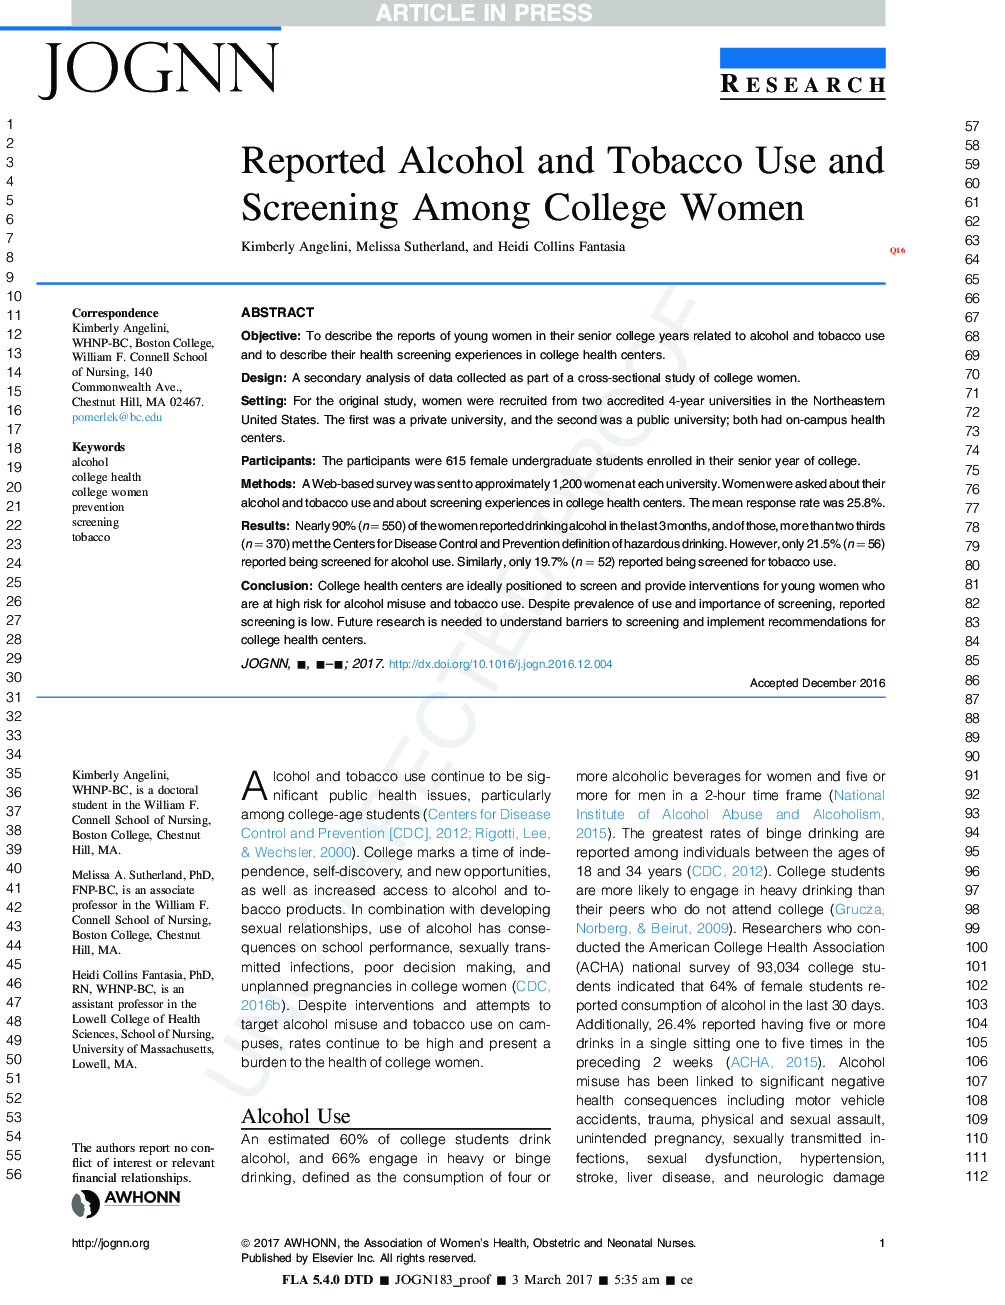 Reported Alcohol and Tobacco Use and Screening Among College Women